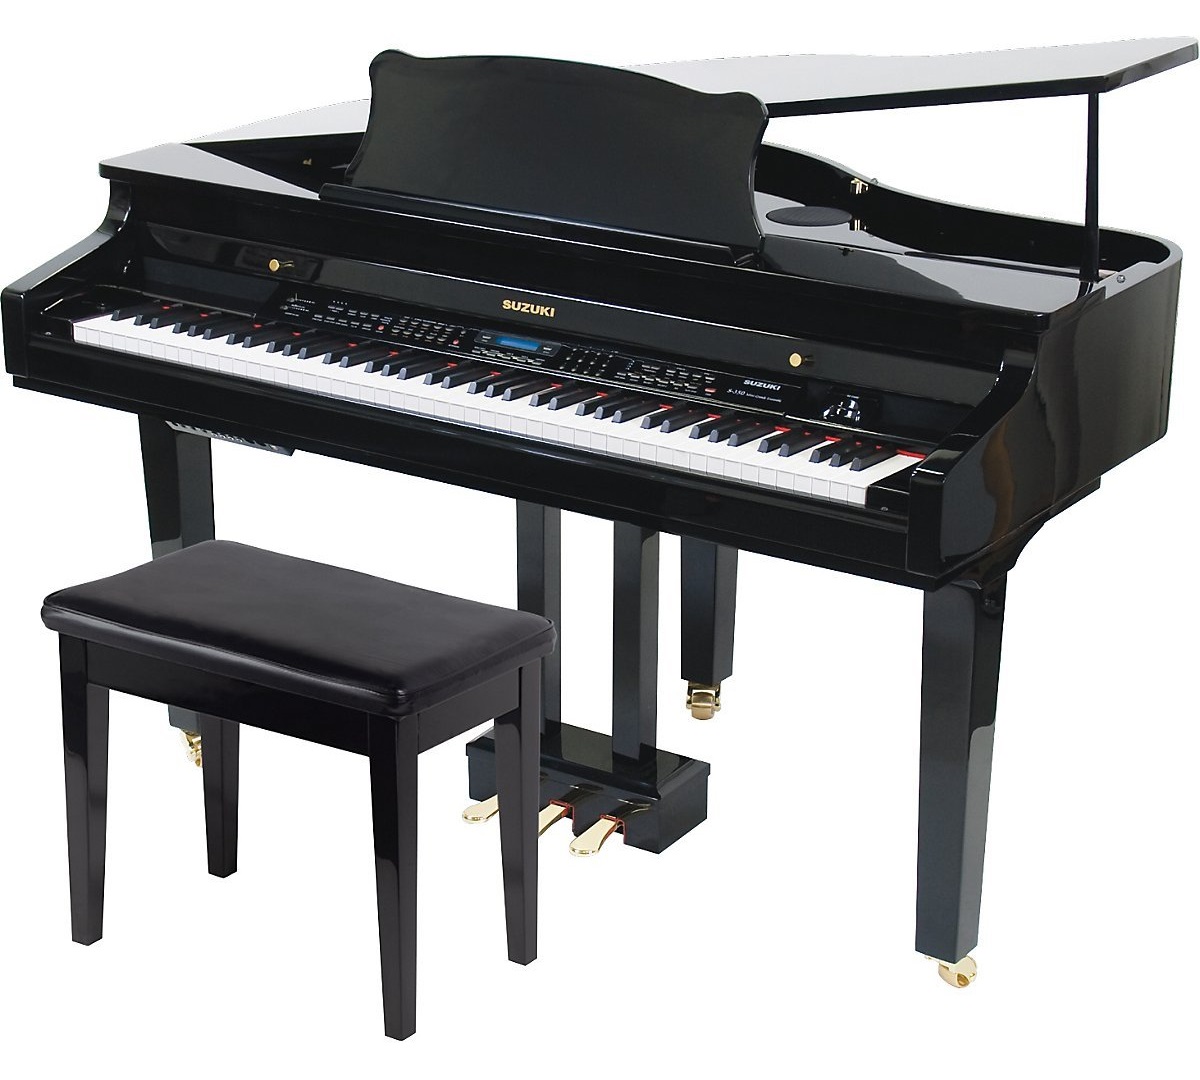 among the best digital pianos is the baby grand